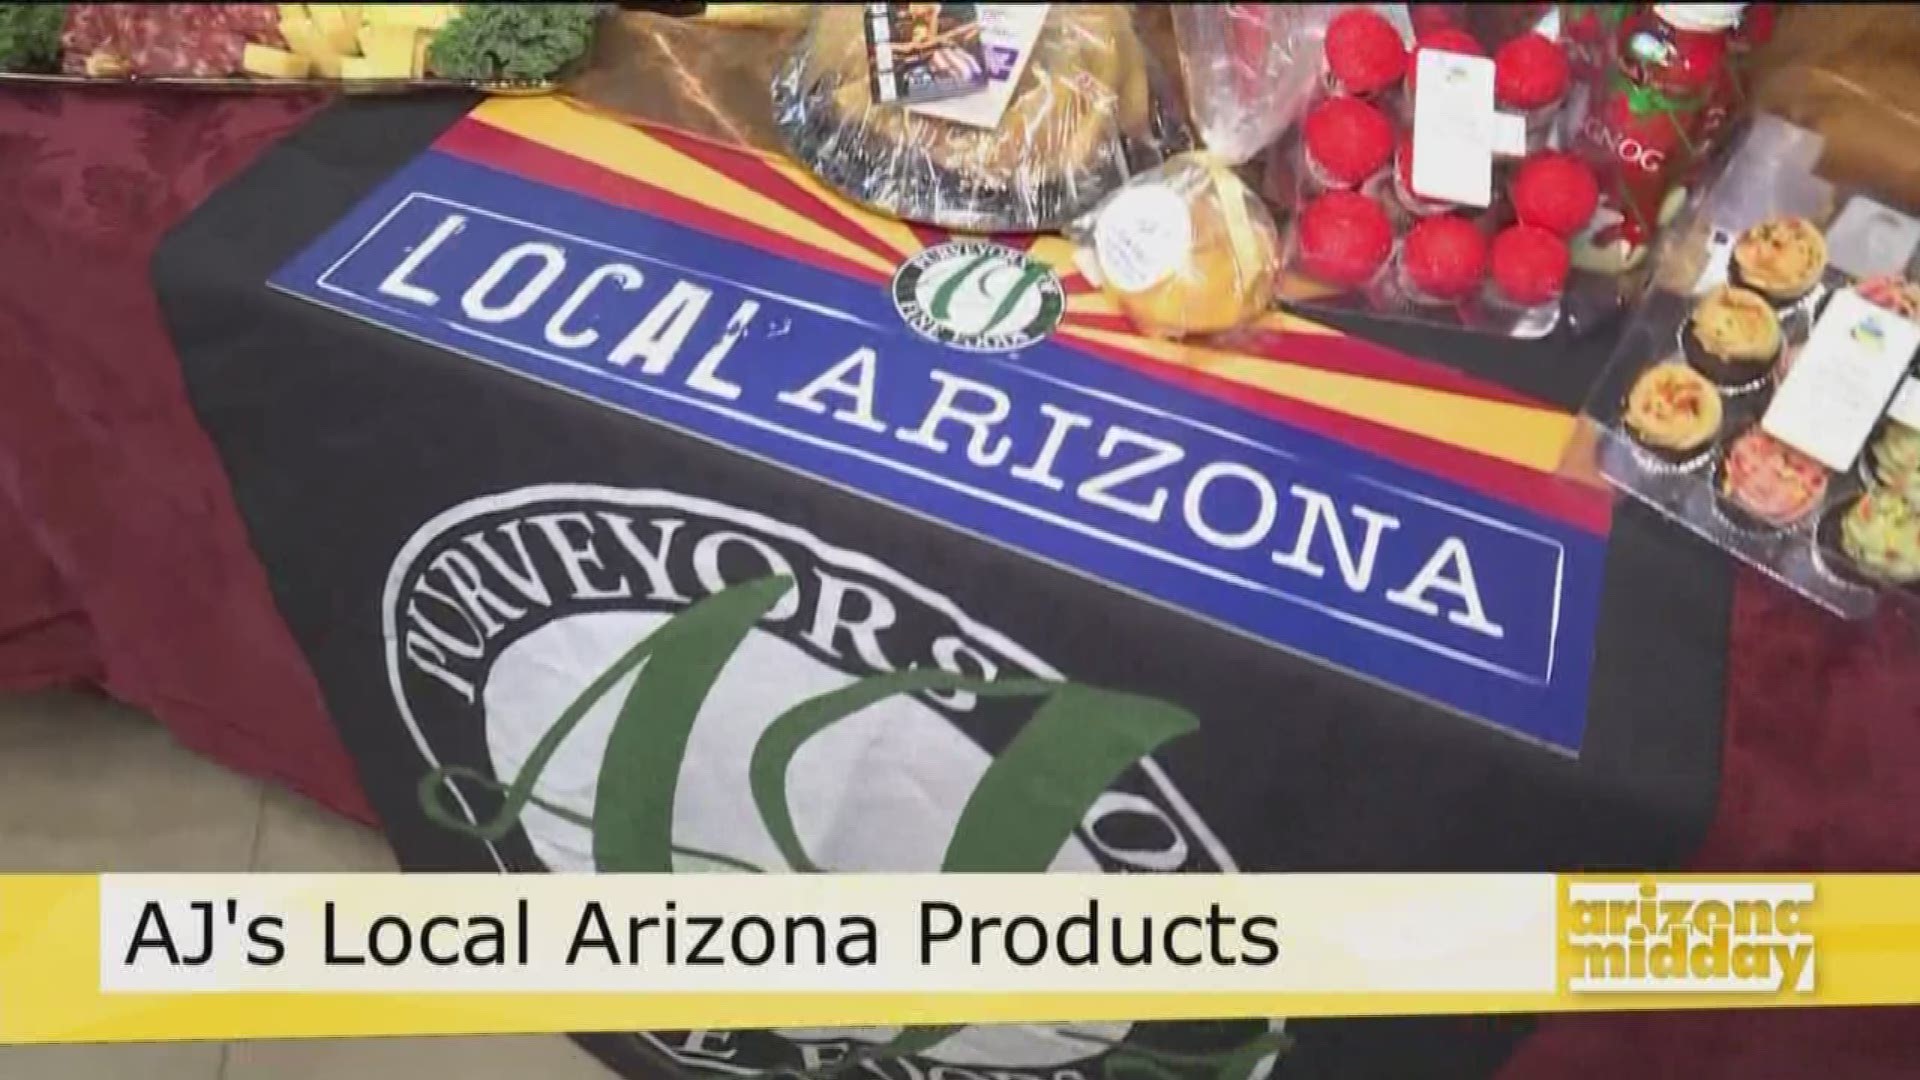 We're giving you a look at all the local Arizona products AJ's Fine Foods offers.